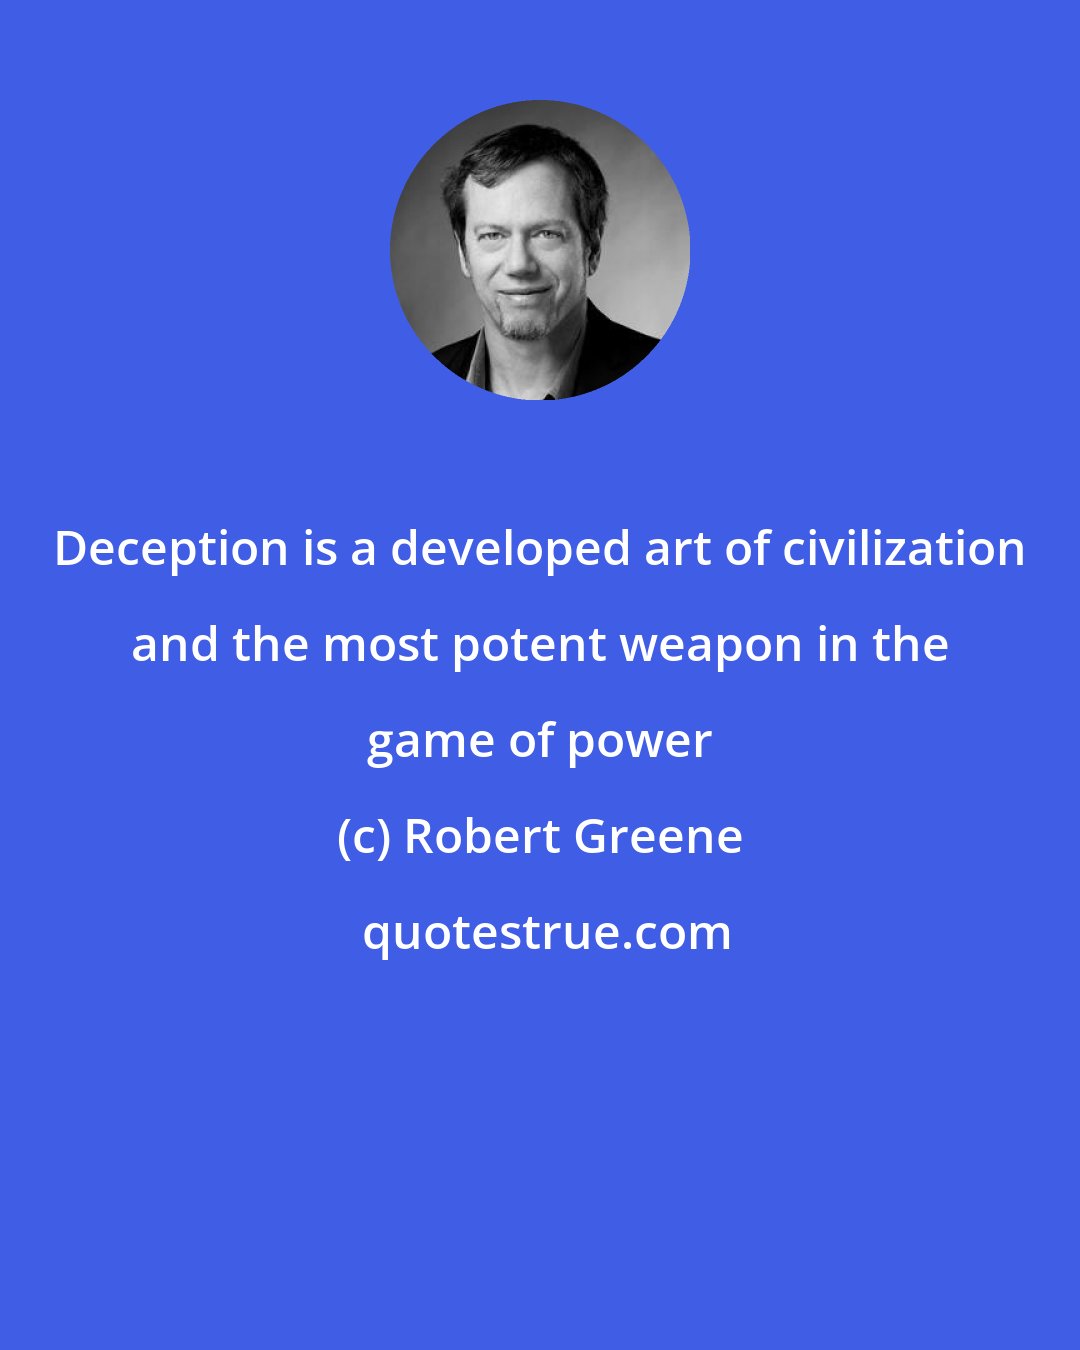 Robert Greene: Deception is a developed art of civilization and the most potent weapon in the game of power